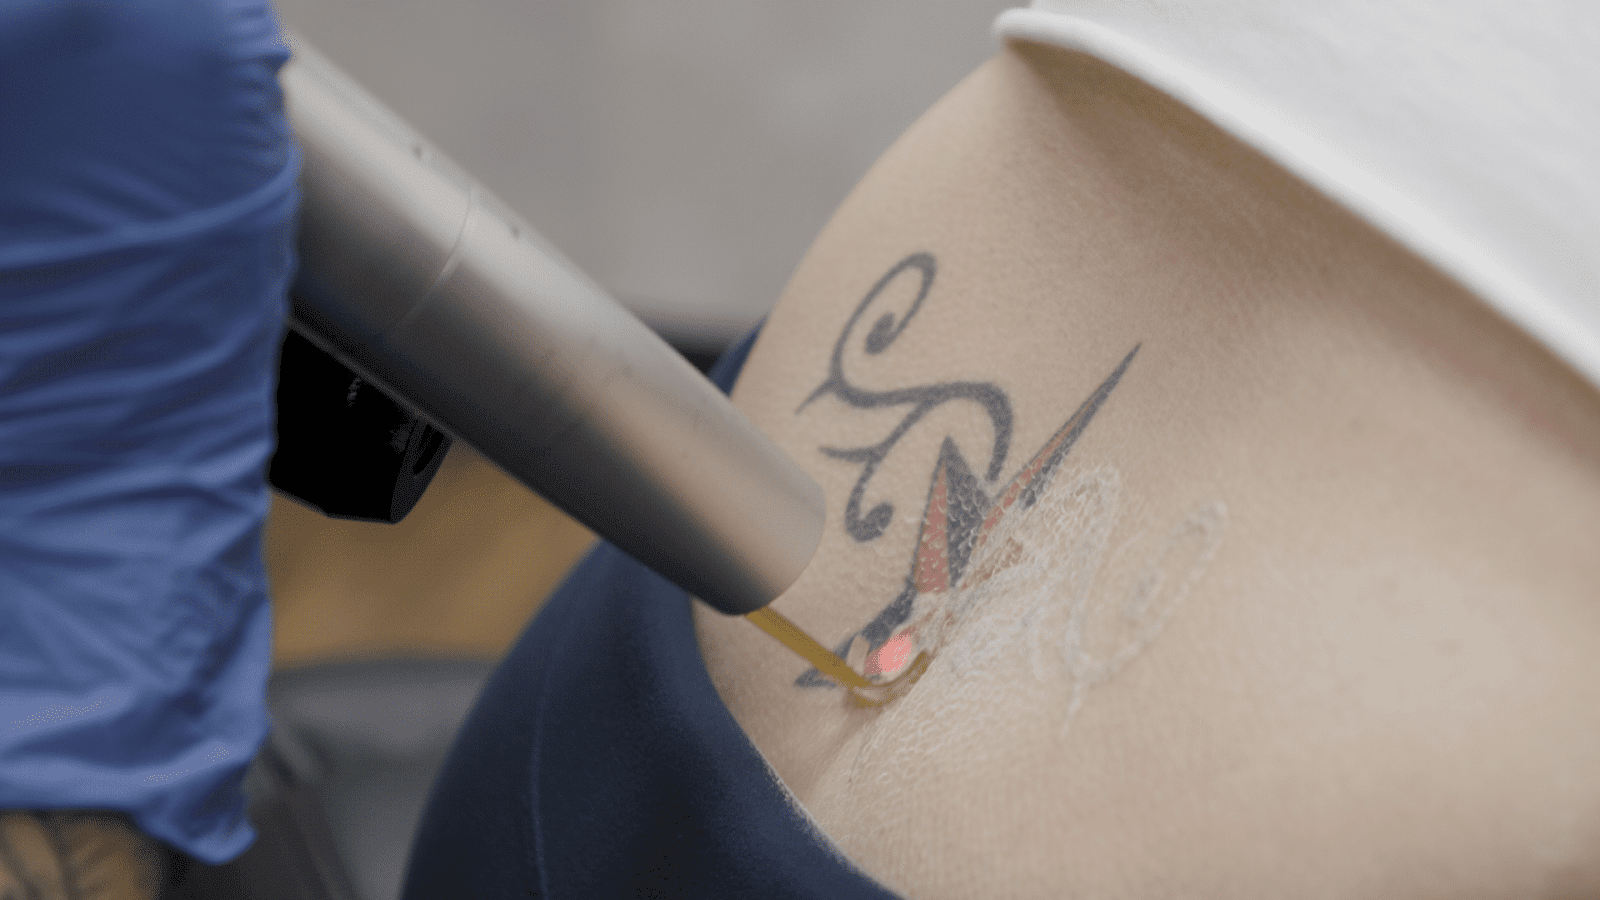 Picosure Tattoo Removal vs Picoway Tattoo Removal | Removery